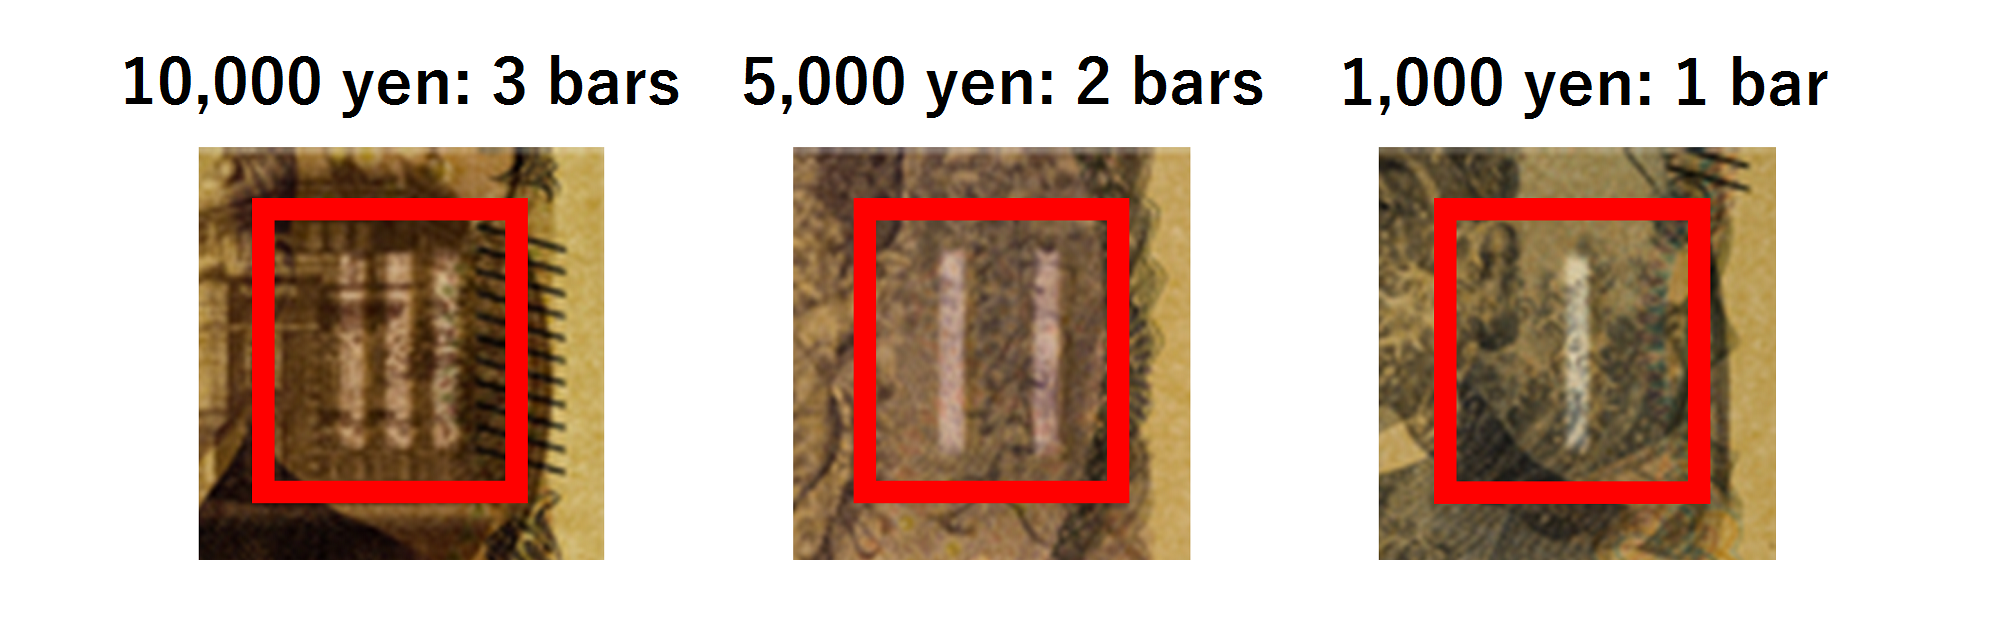 Images of watermark-bar-patterns embedded in each denomination: 3 bars on the 10,000 yen note, 2 bars on the 5,000 yen note, and 1 bar on the 1,000 yen note.